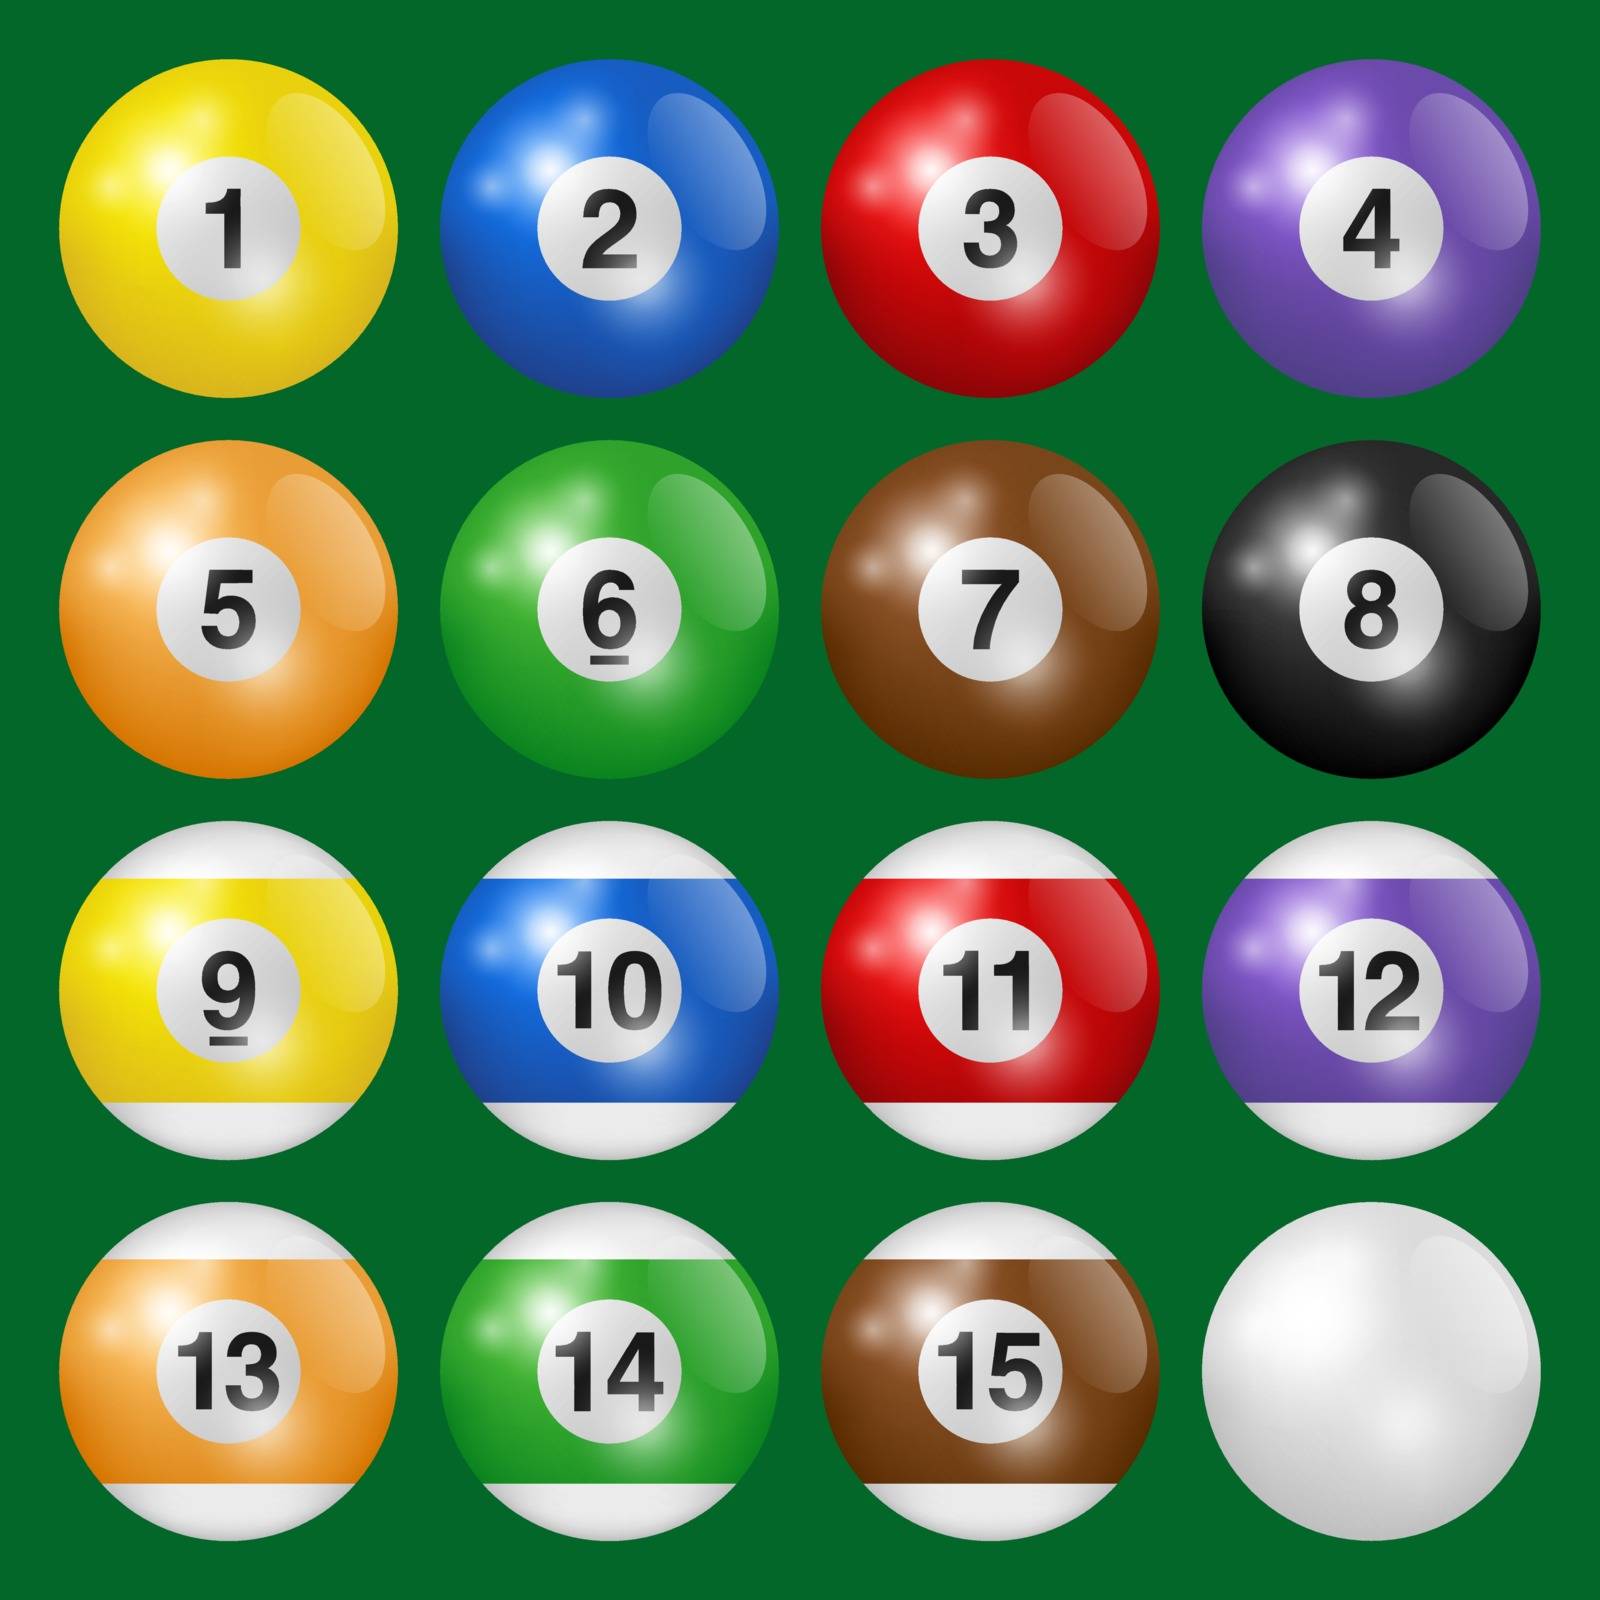 Billiard, pool and snooker balls collection. Set of billiard balls isolated on green background. Vector illustration. by vermicule